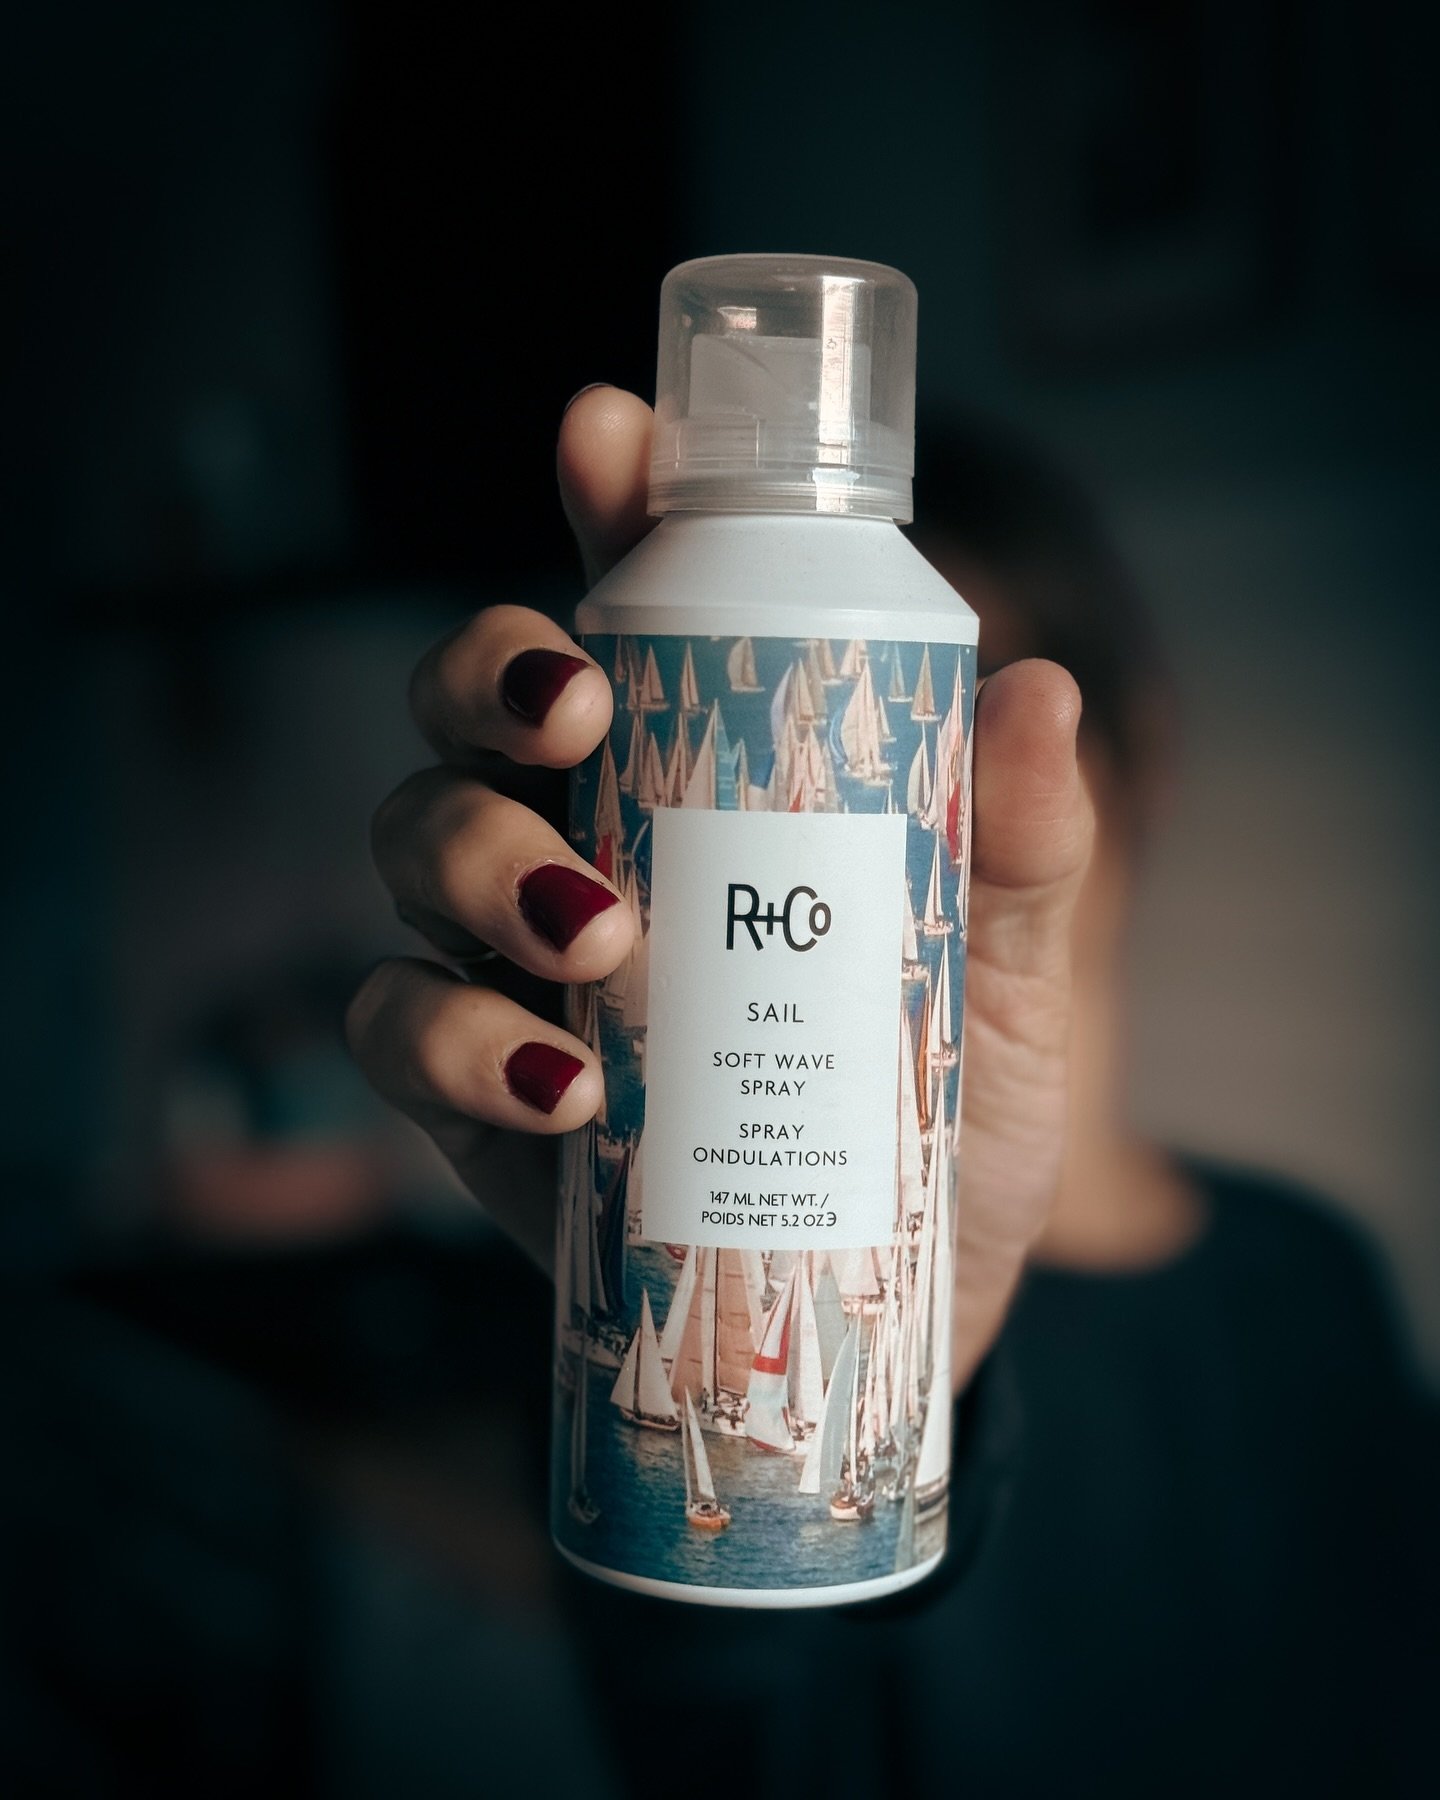 Just one of my favourite products! @randco . The shine, the longevity and the &ldquo;Ooo la la&rdquo;&hellip;. Nothing is gonna make your hair stand out better than this!